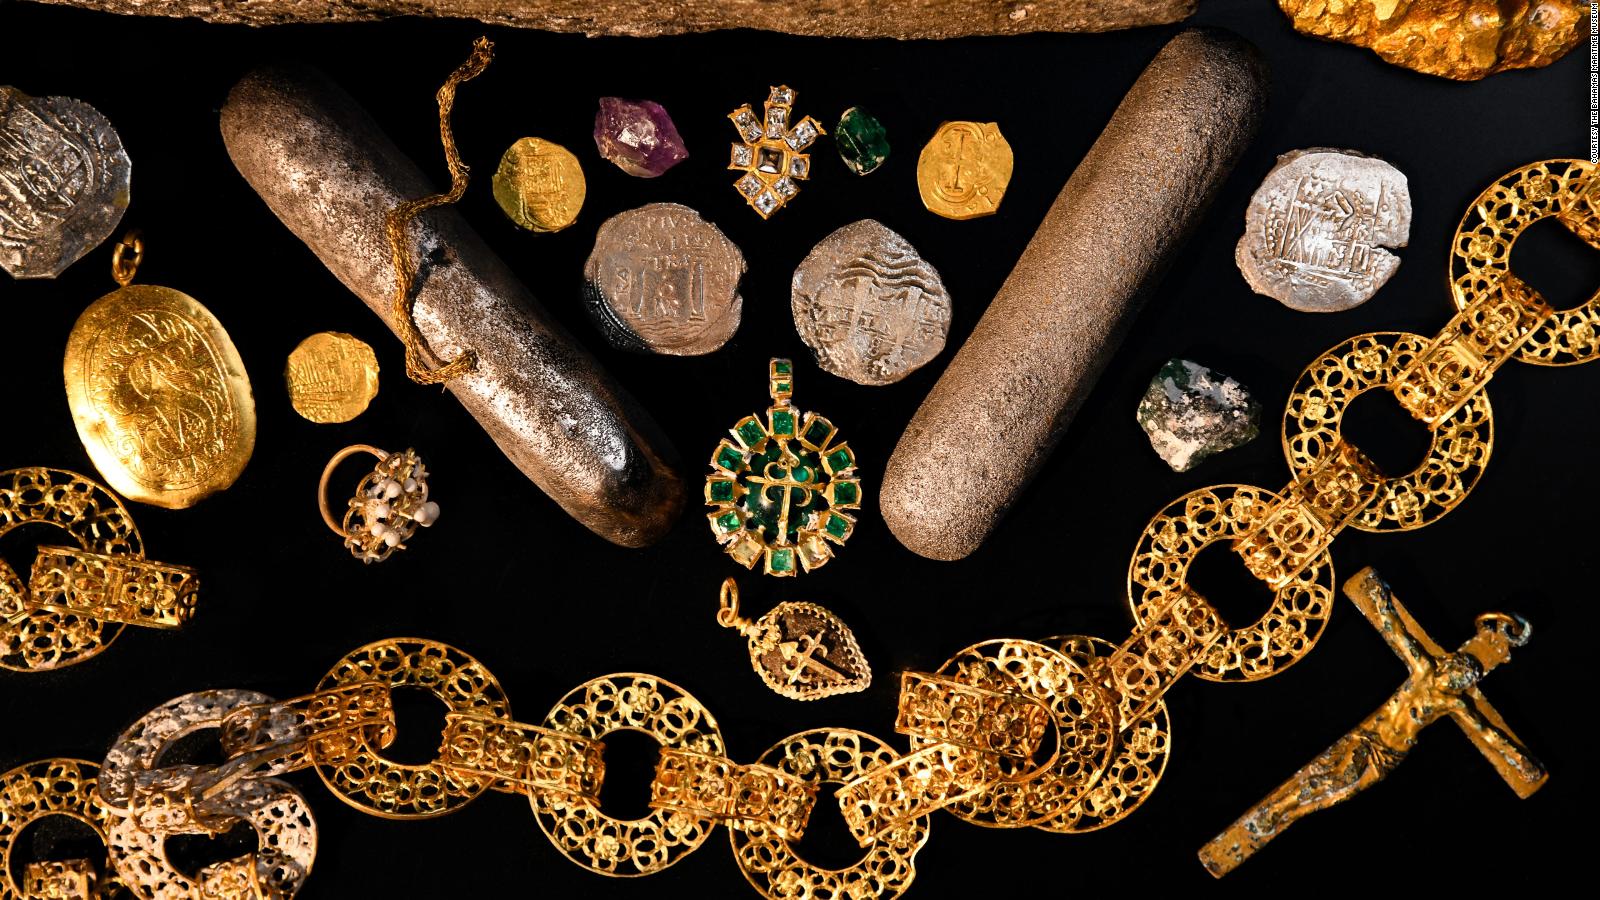 They recovered treasure from a Spanish shipwreck 350 years ago